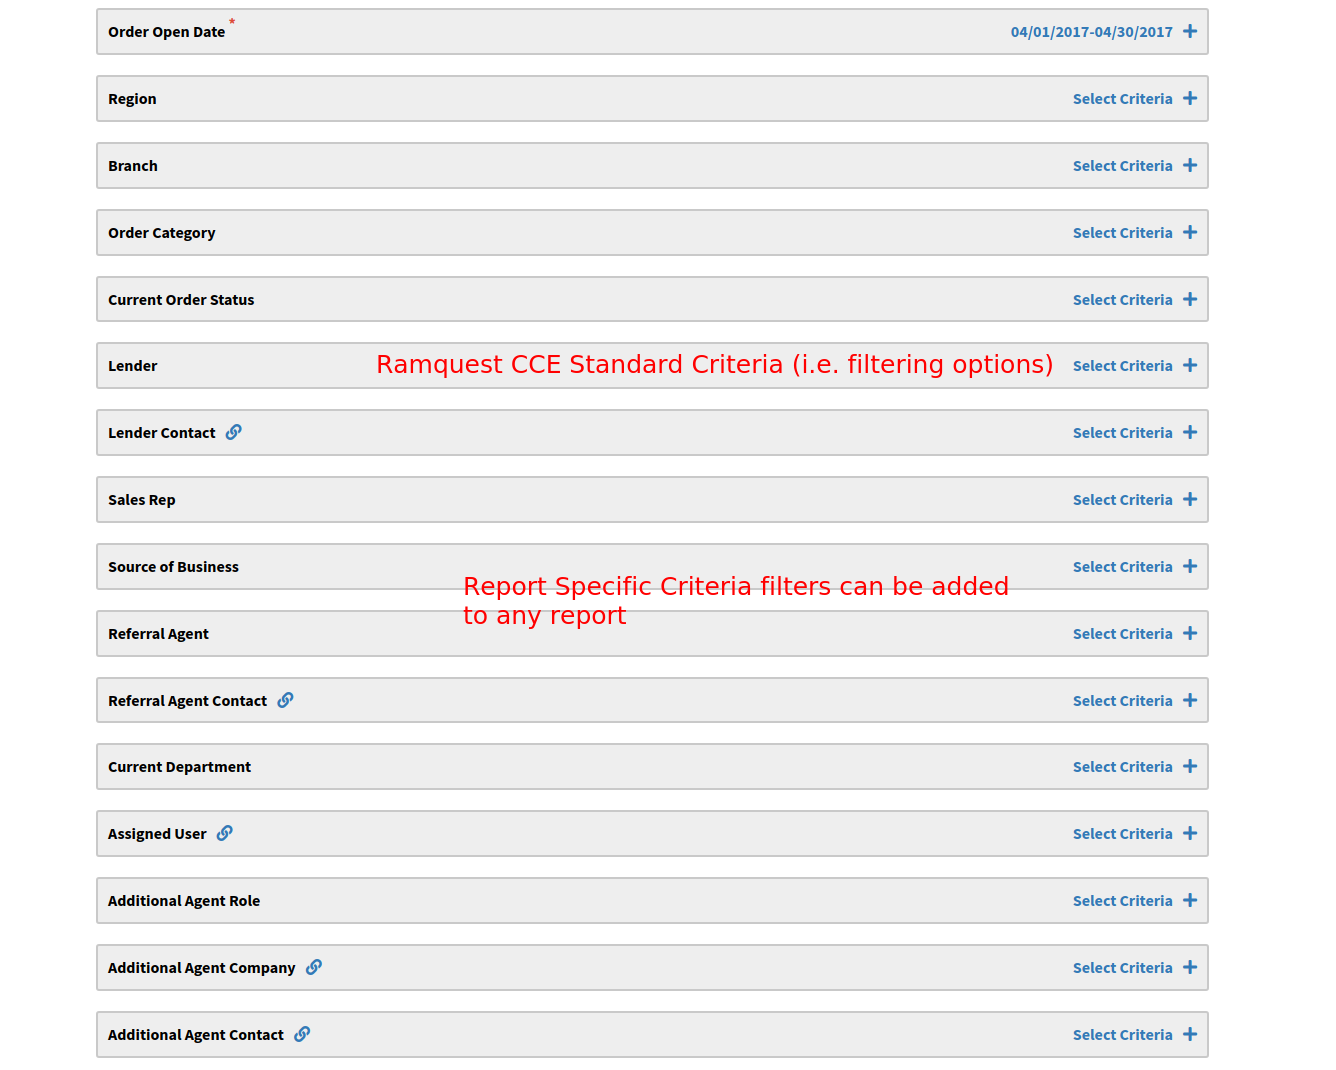 ../_images/standard-criteria-options-ramquest-cce.png